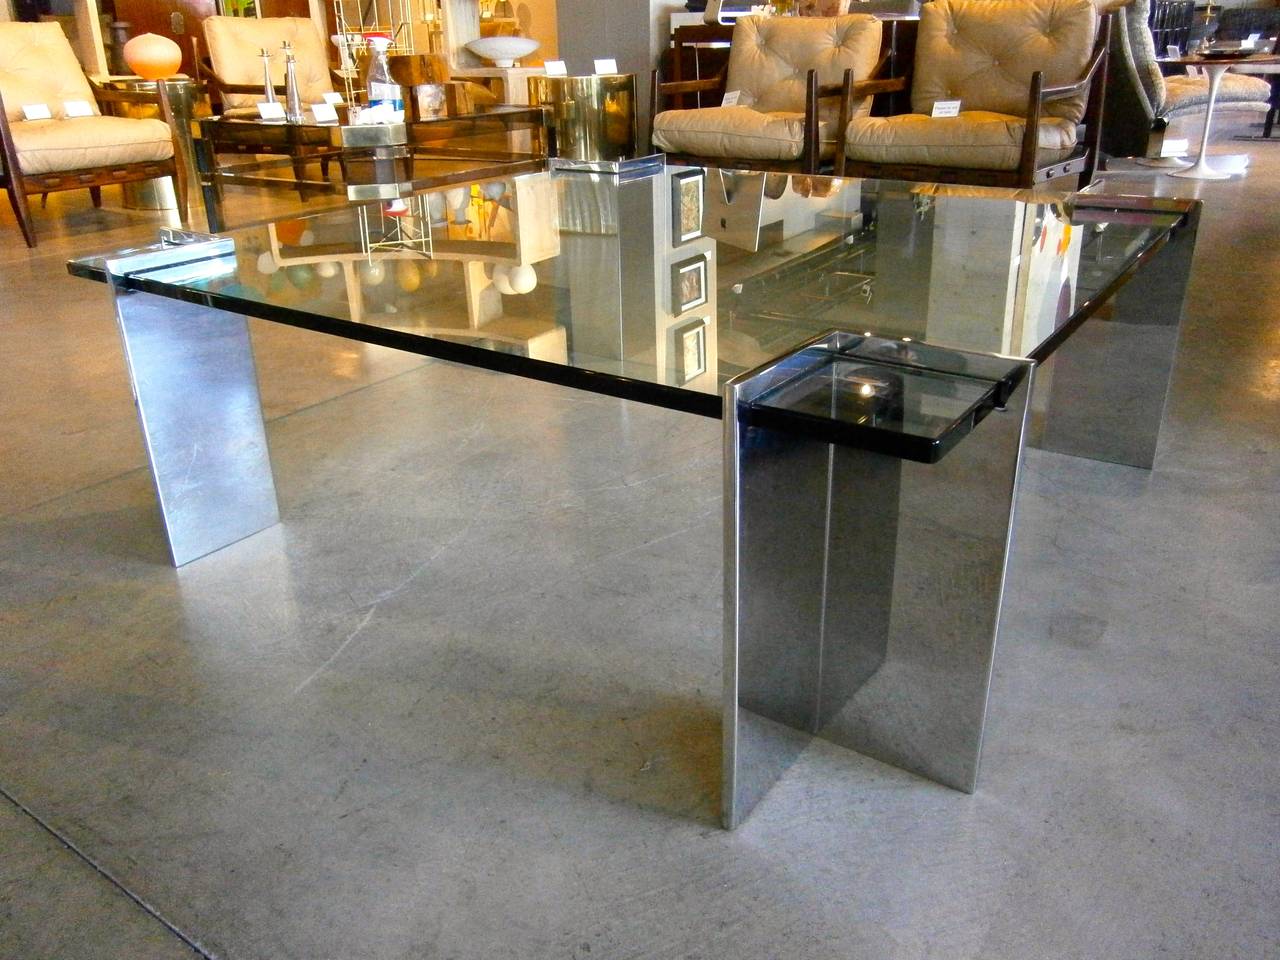 Late 20th Century Glass and Polished Steel Coffee Table by Leon Rosen for Pace Collection C. 1970s